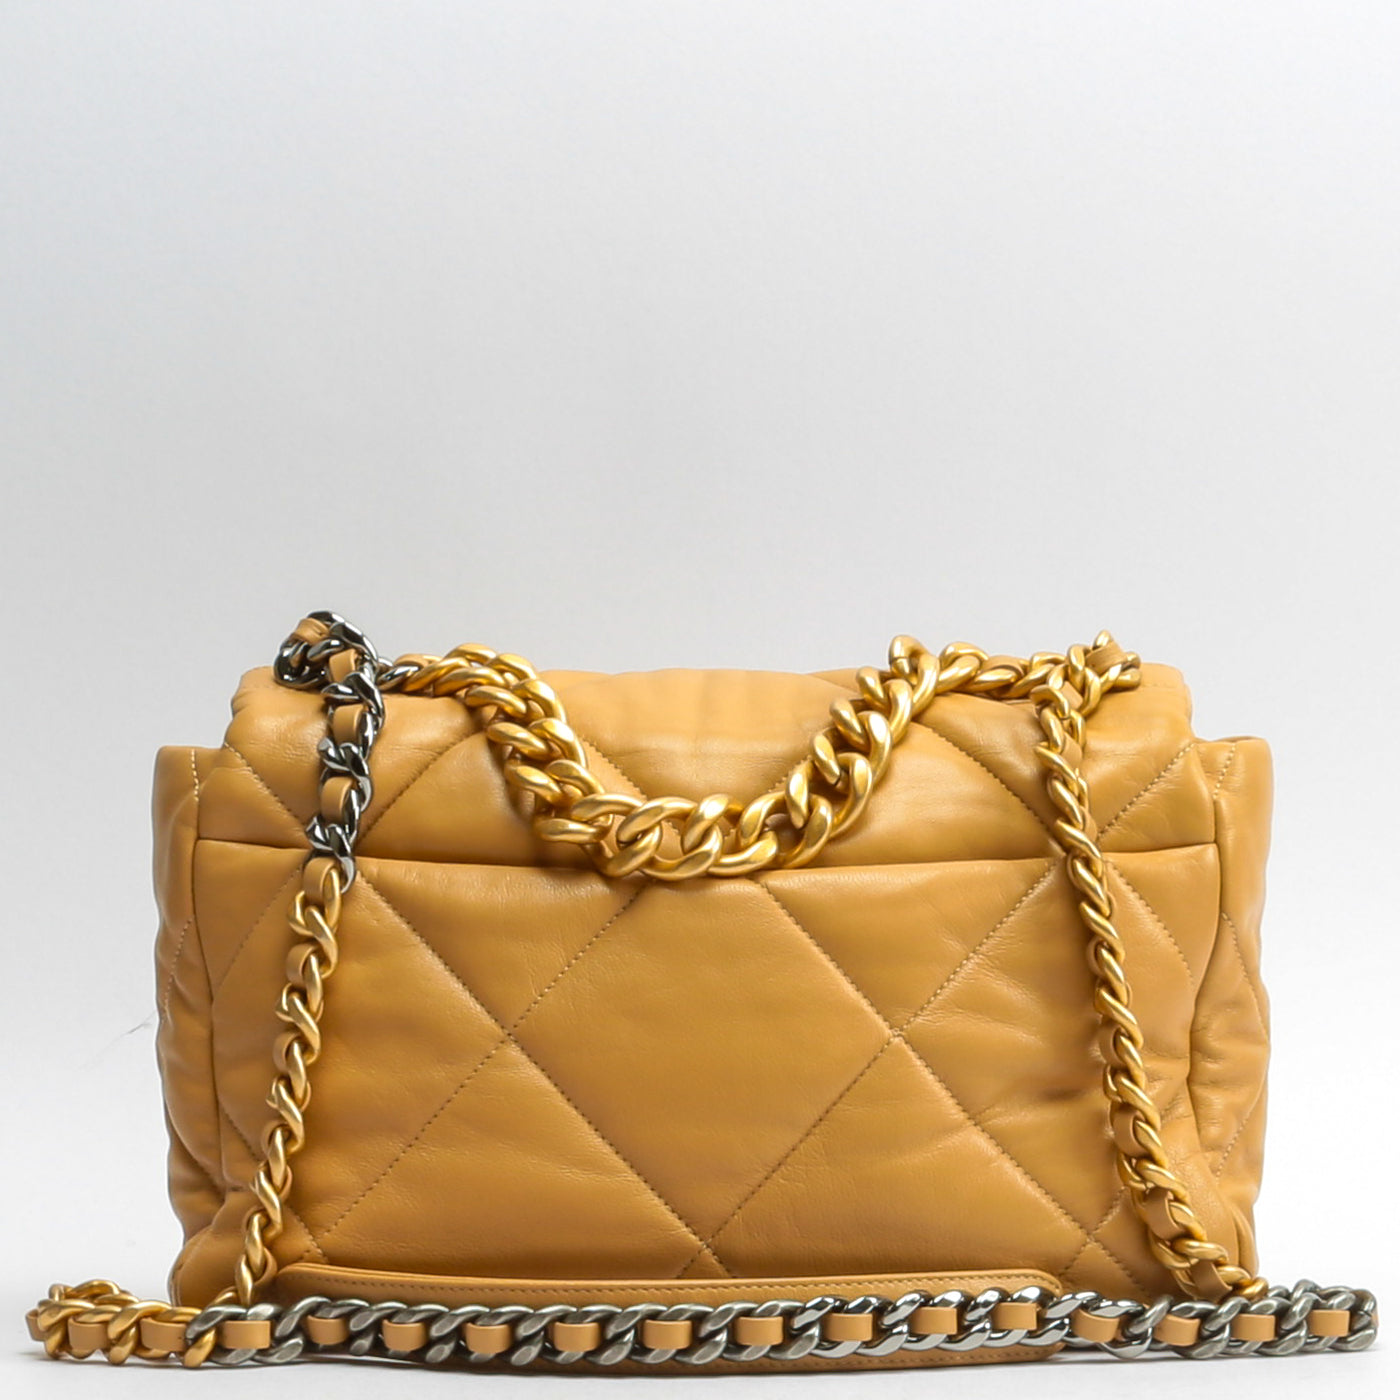 CHANEL Large 19 Flap Bag - Nude